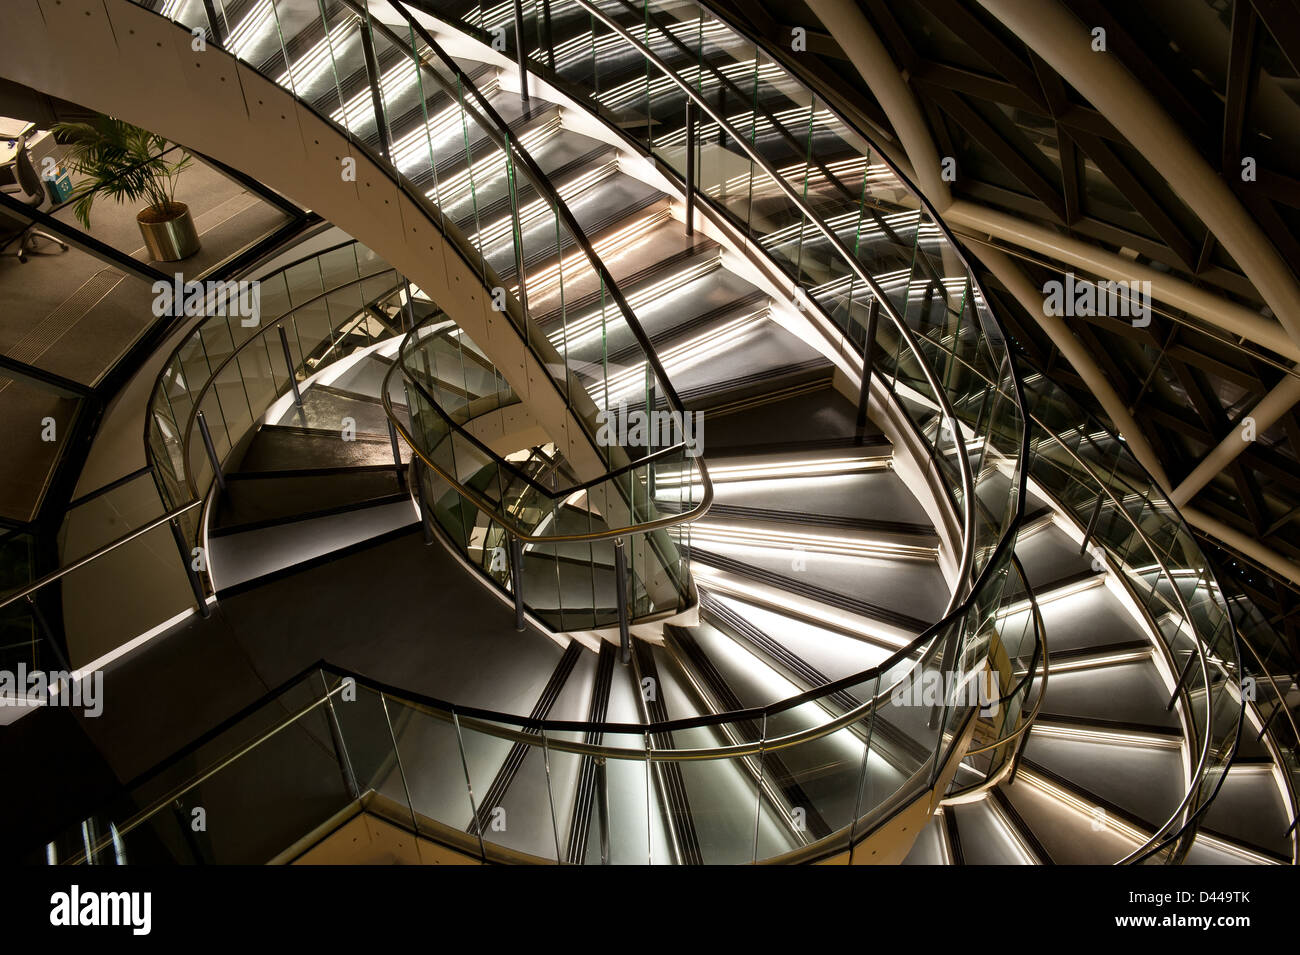 Spiral staircase featuring stainless steel and glass. Stock Photo